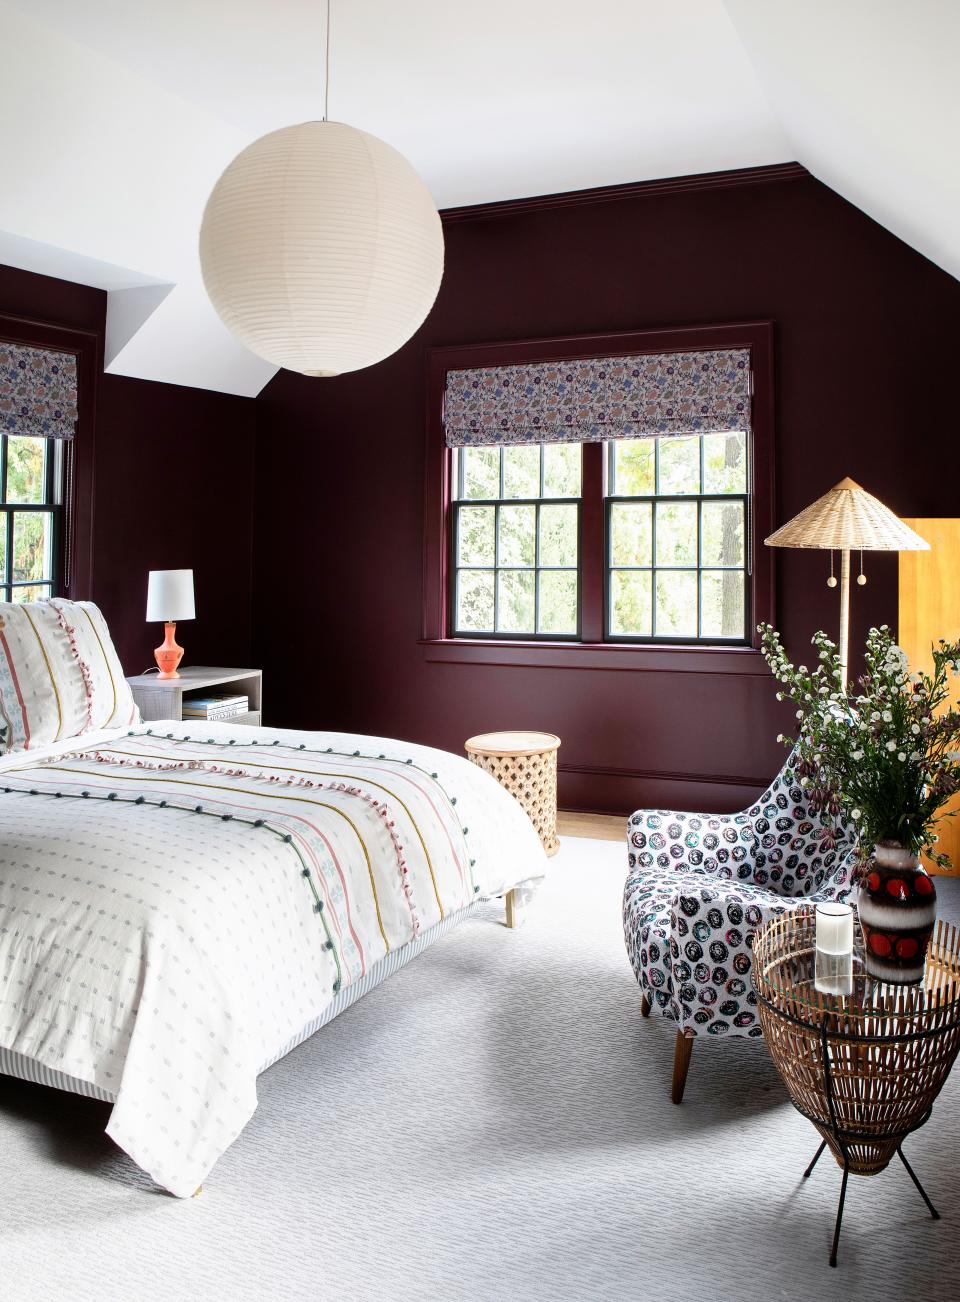 This guest room has a “tremendous presence,” observes Galli. The dark walls, painted in a Farrow & Ball hue, are purposefully paired with delicate, light furniture. The modern platform bed is from The Inside. The vintage armchair is from 1stDibs, and the bright rug is Kravet. The floor lamp is Celerie Kemble, and the window fabric is by Shyam Ahuja.